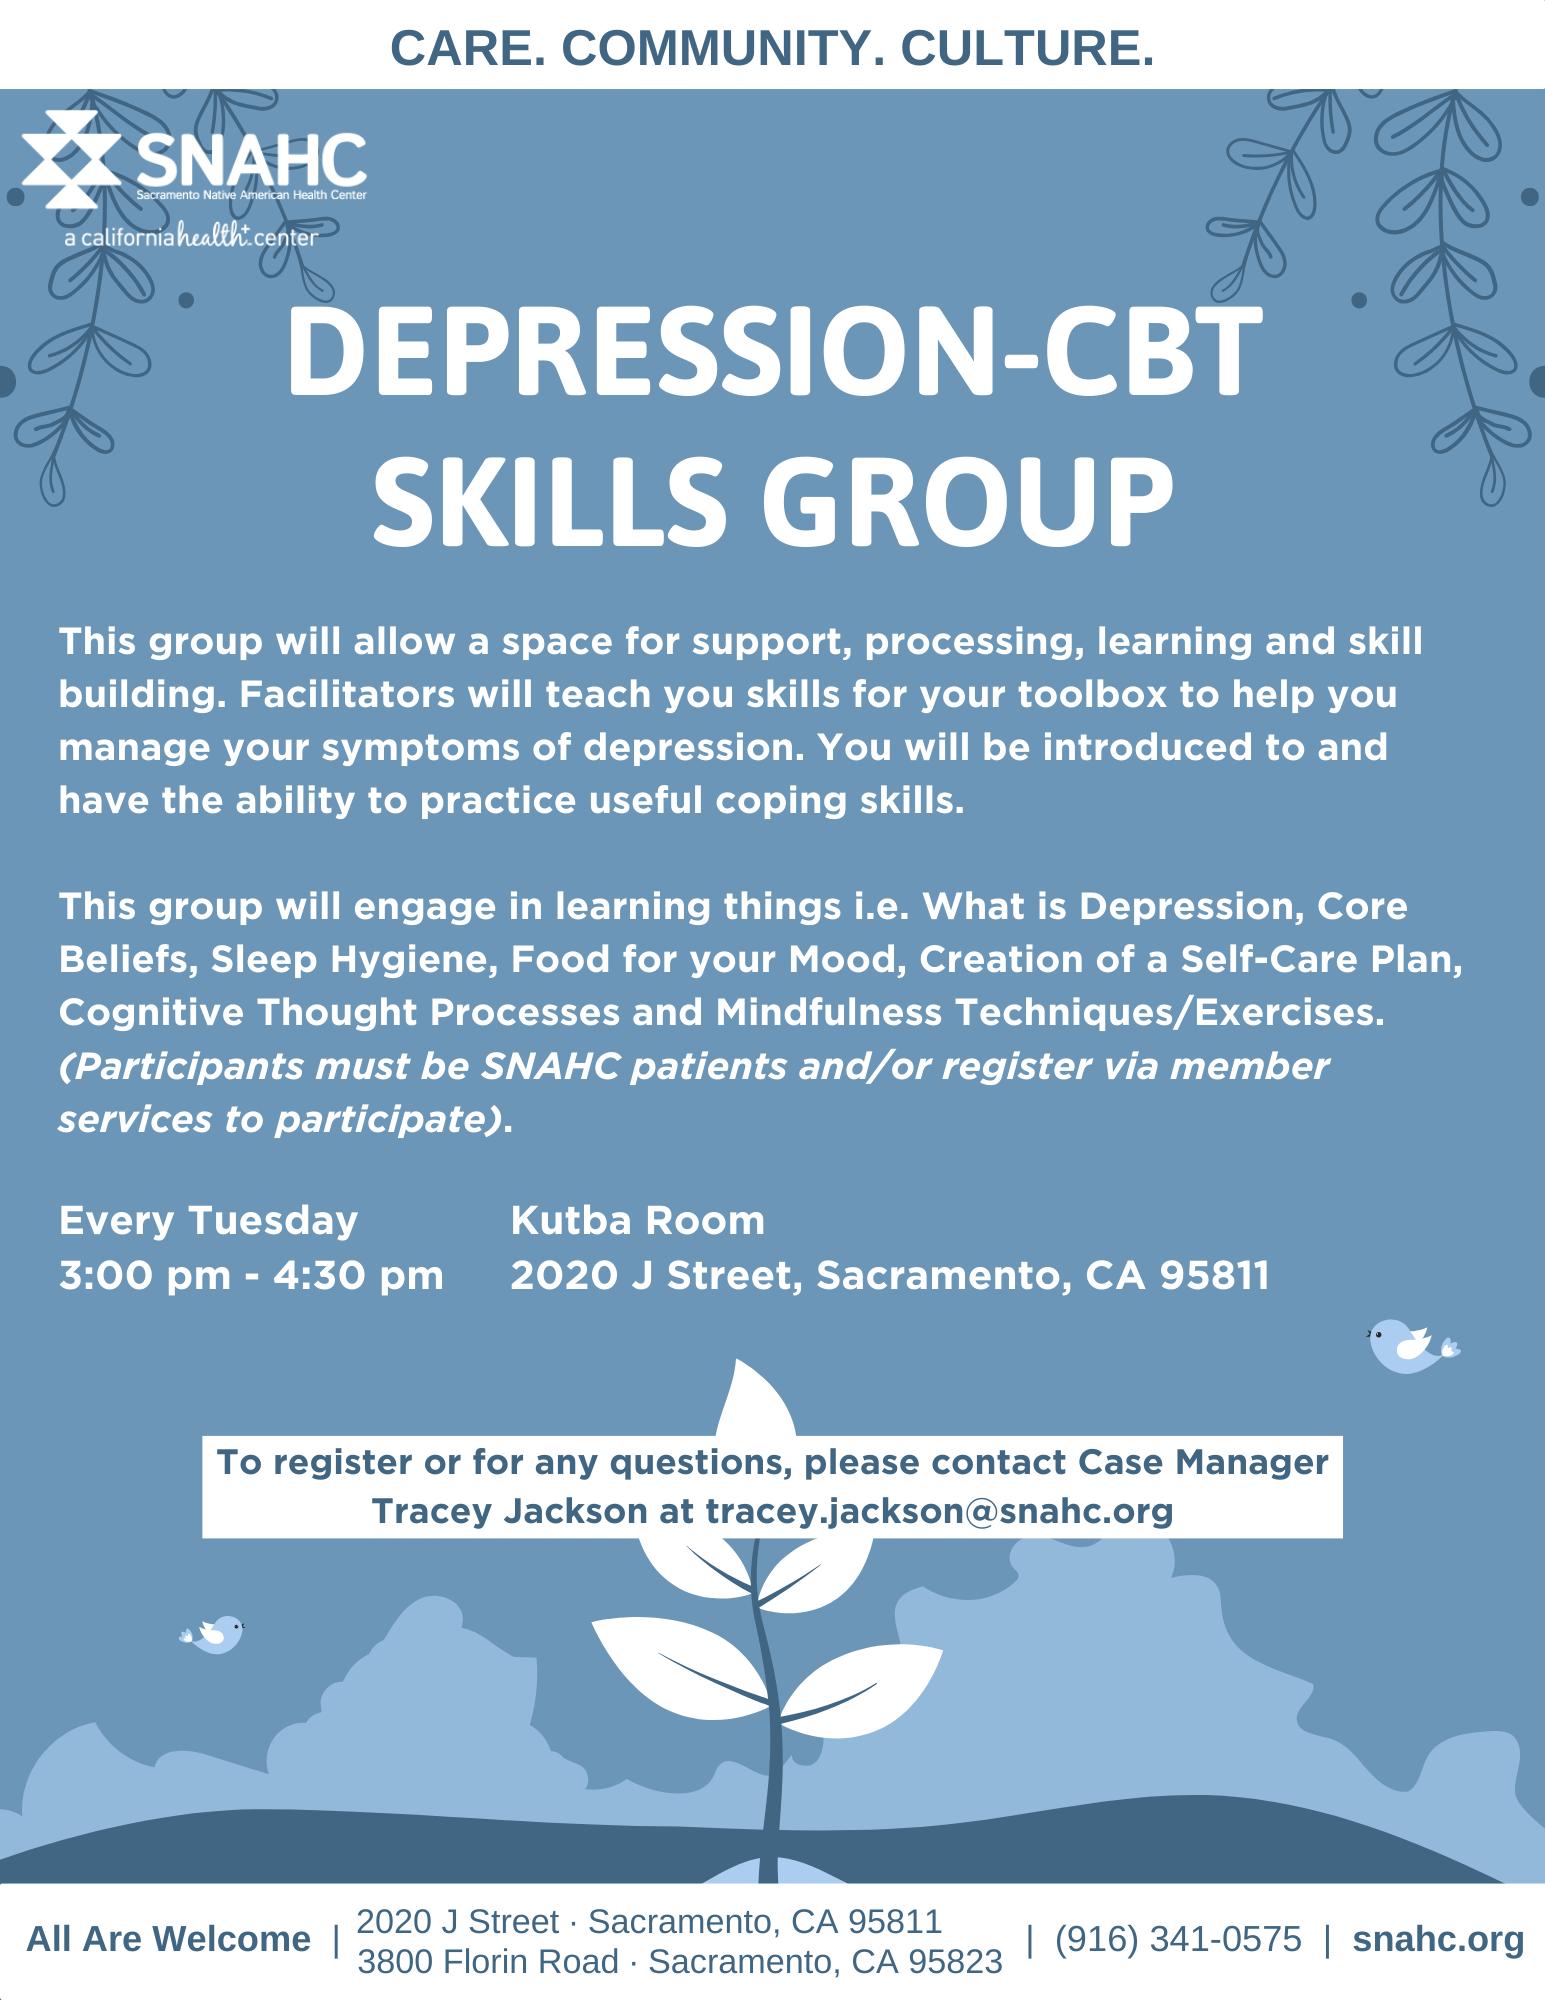 Depression-CBT Skills Group Flyer. Meeting every Tuesday from 3:00 pm - 4:30 pm. Happening in Kutba Room, 2020 J street, Sacramento, CA. 95811. Participants must be SNAHC patients and/or register via member services to participate.